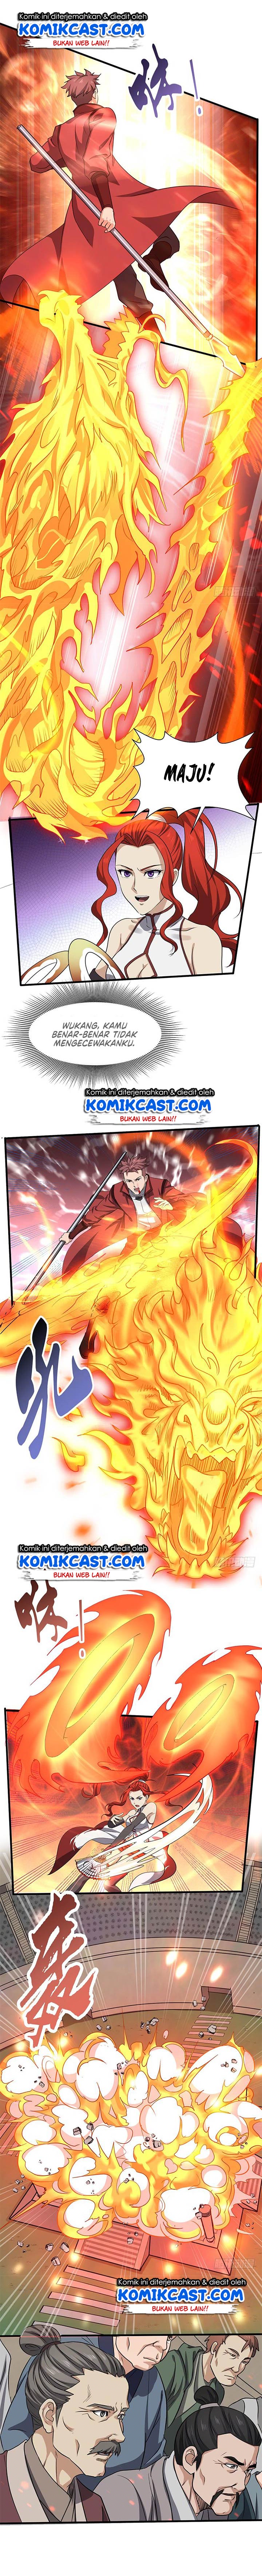 Chaotic Sword God Chapter 174